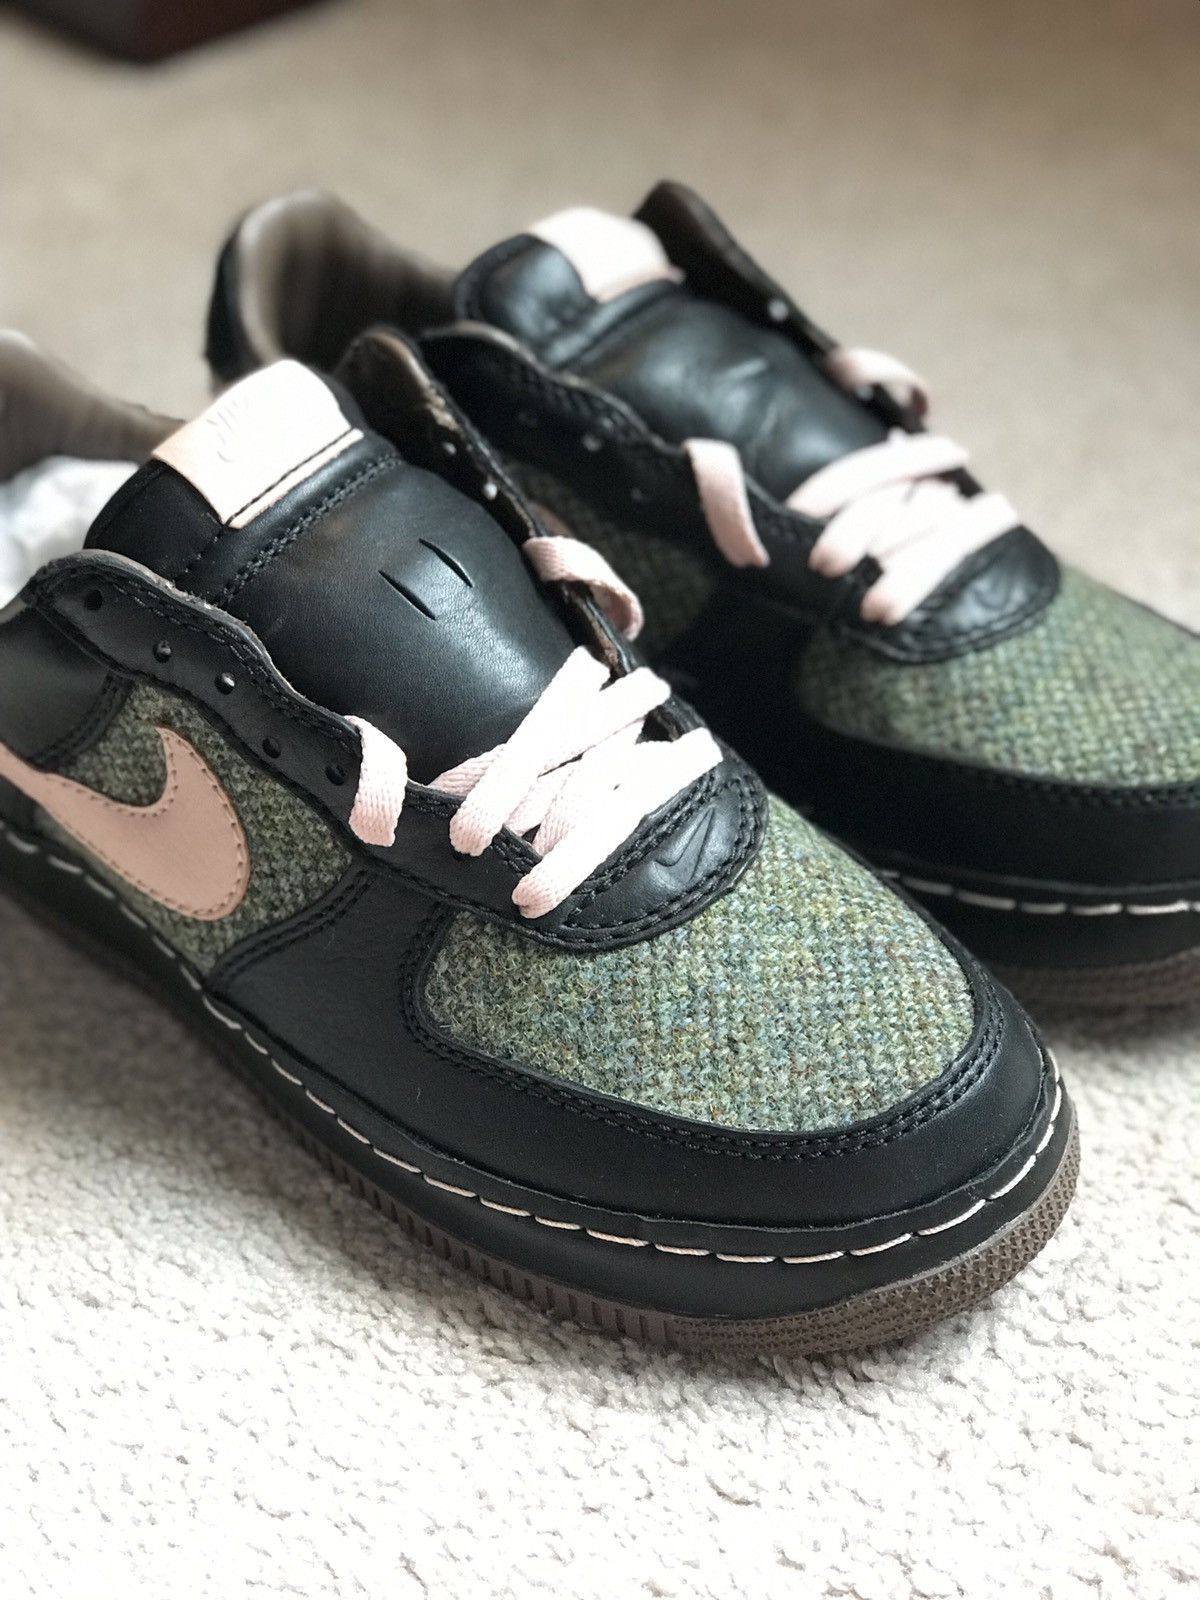 Nike Air Force 1 low insideout Harris Tweed Size US 10 / EU 43 - 2 Preview